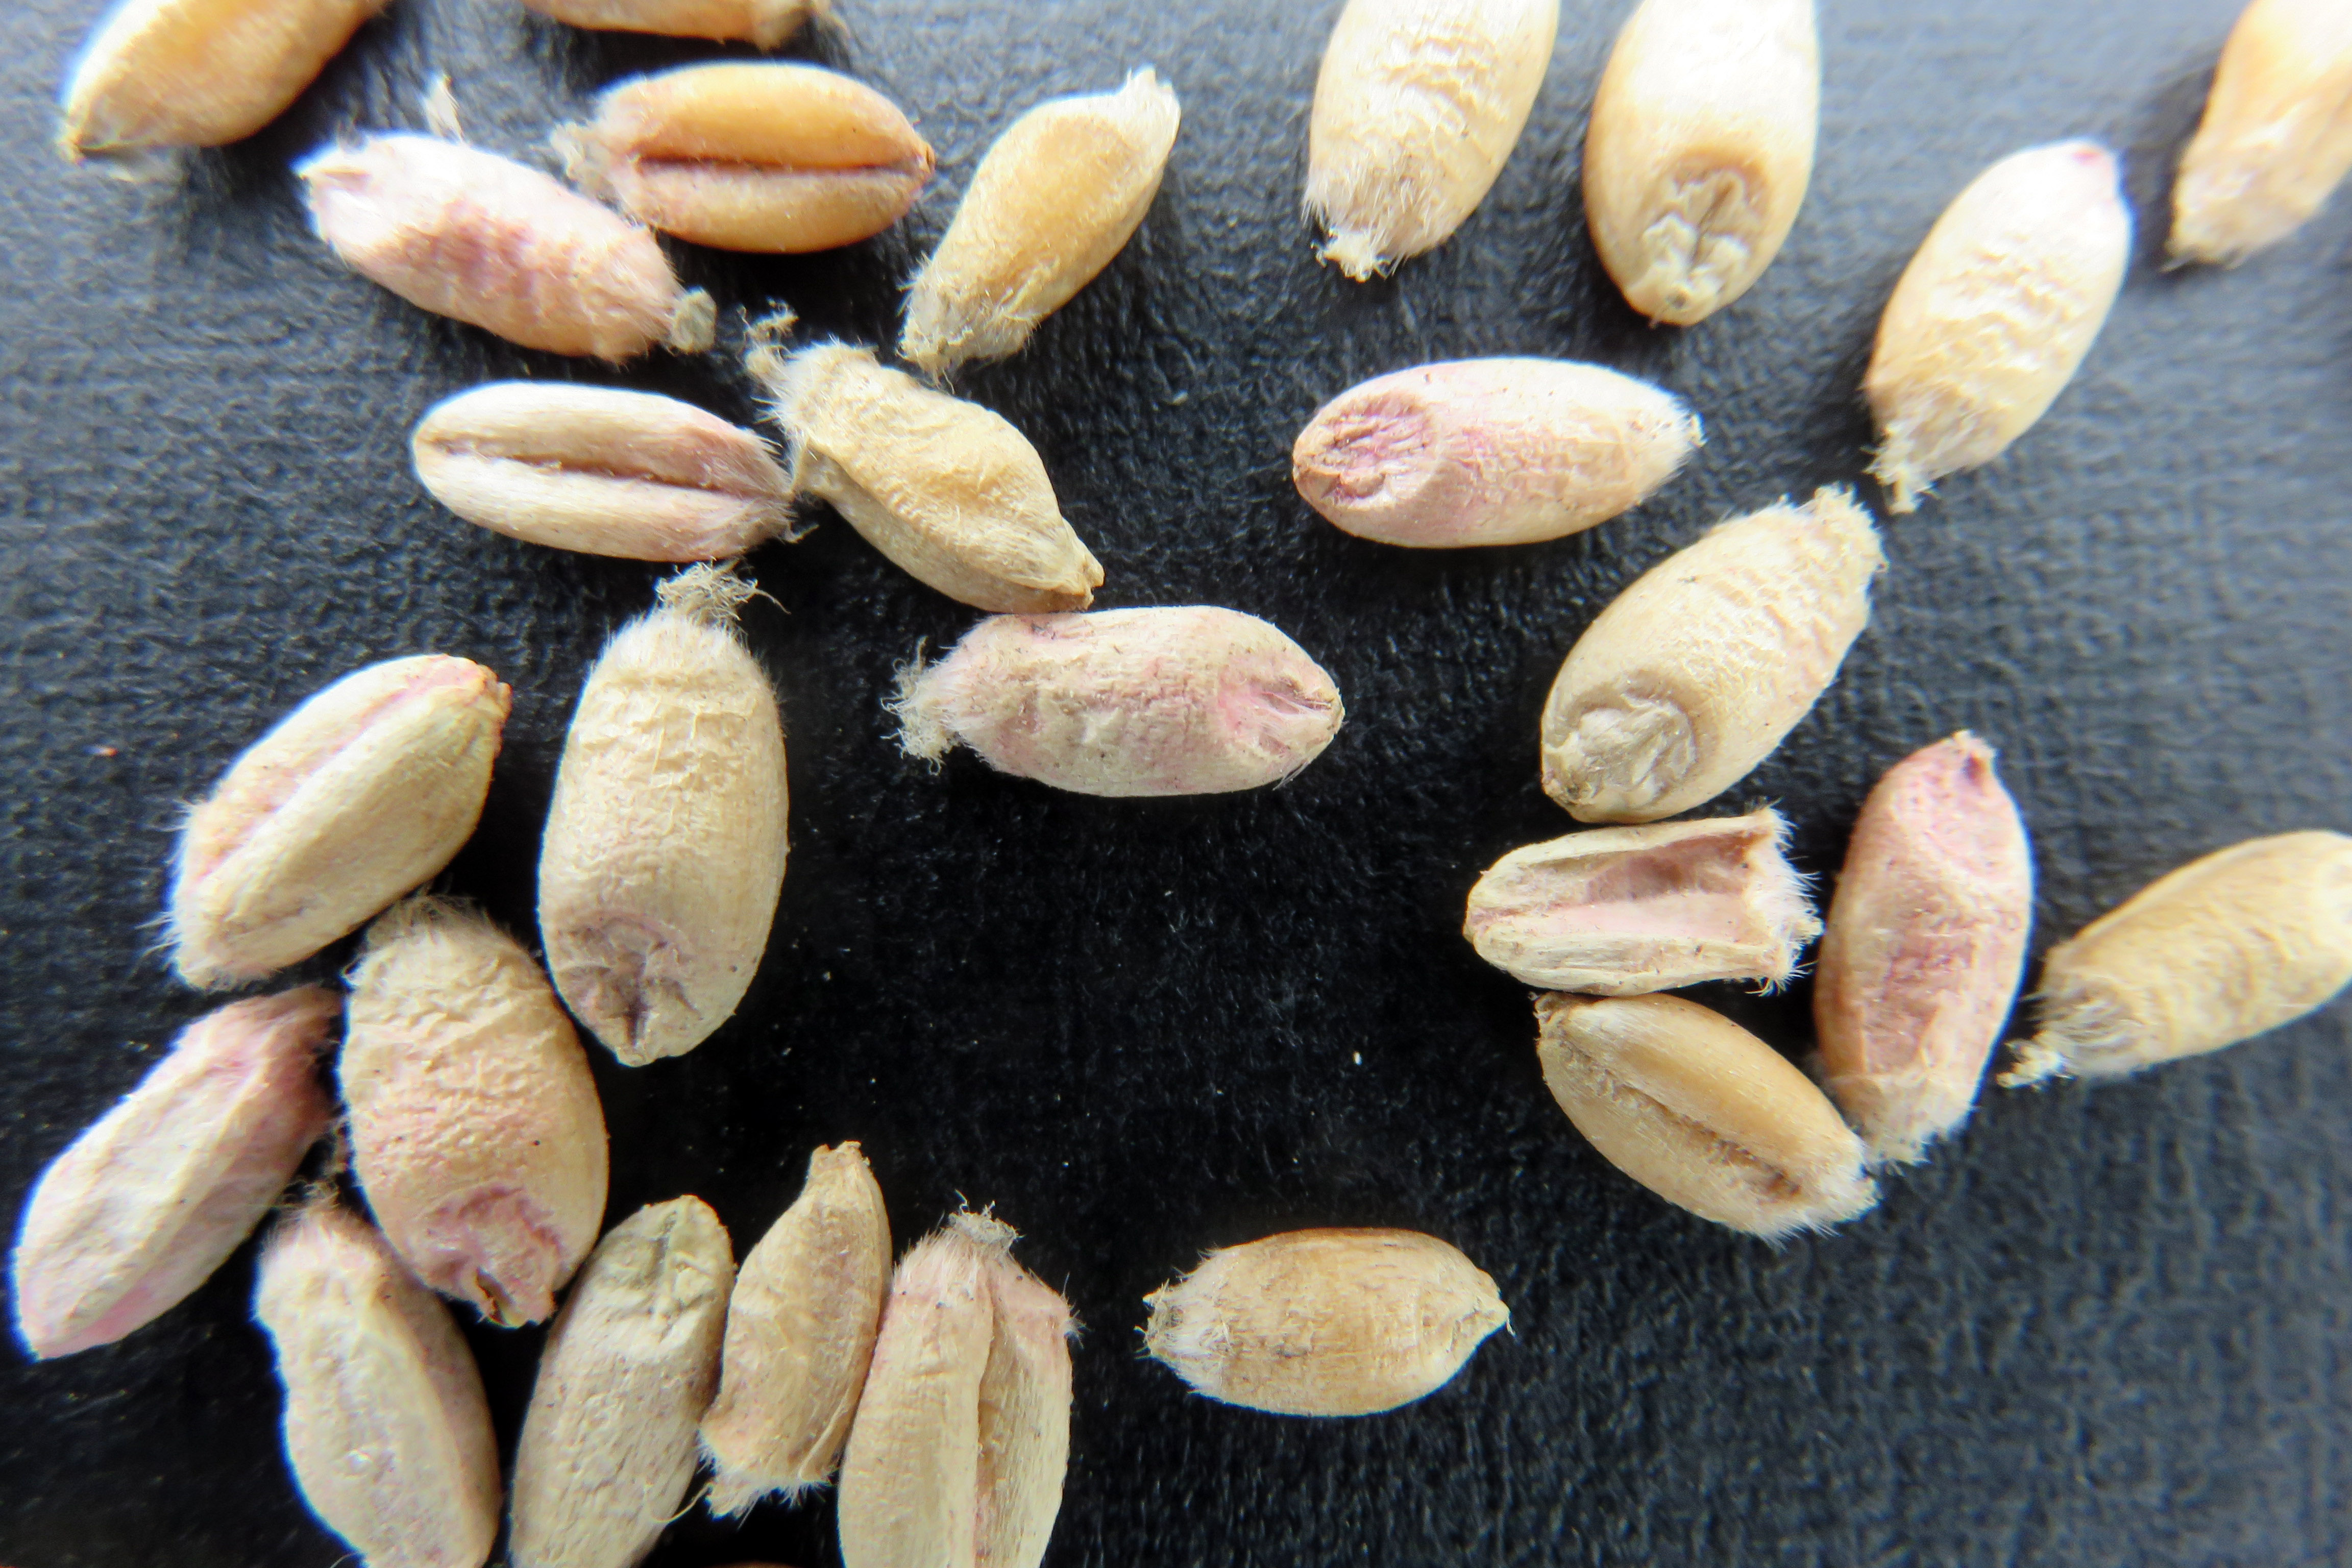 Wheat kernels discolored by Fusarium damage. Details in text following the image.